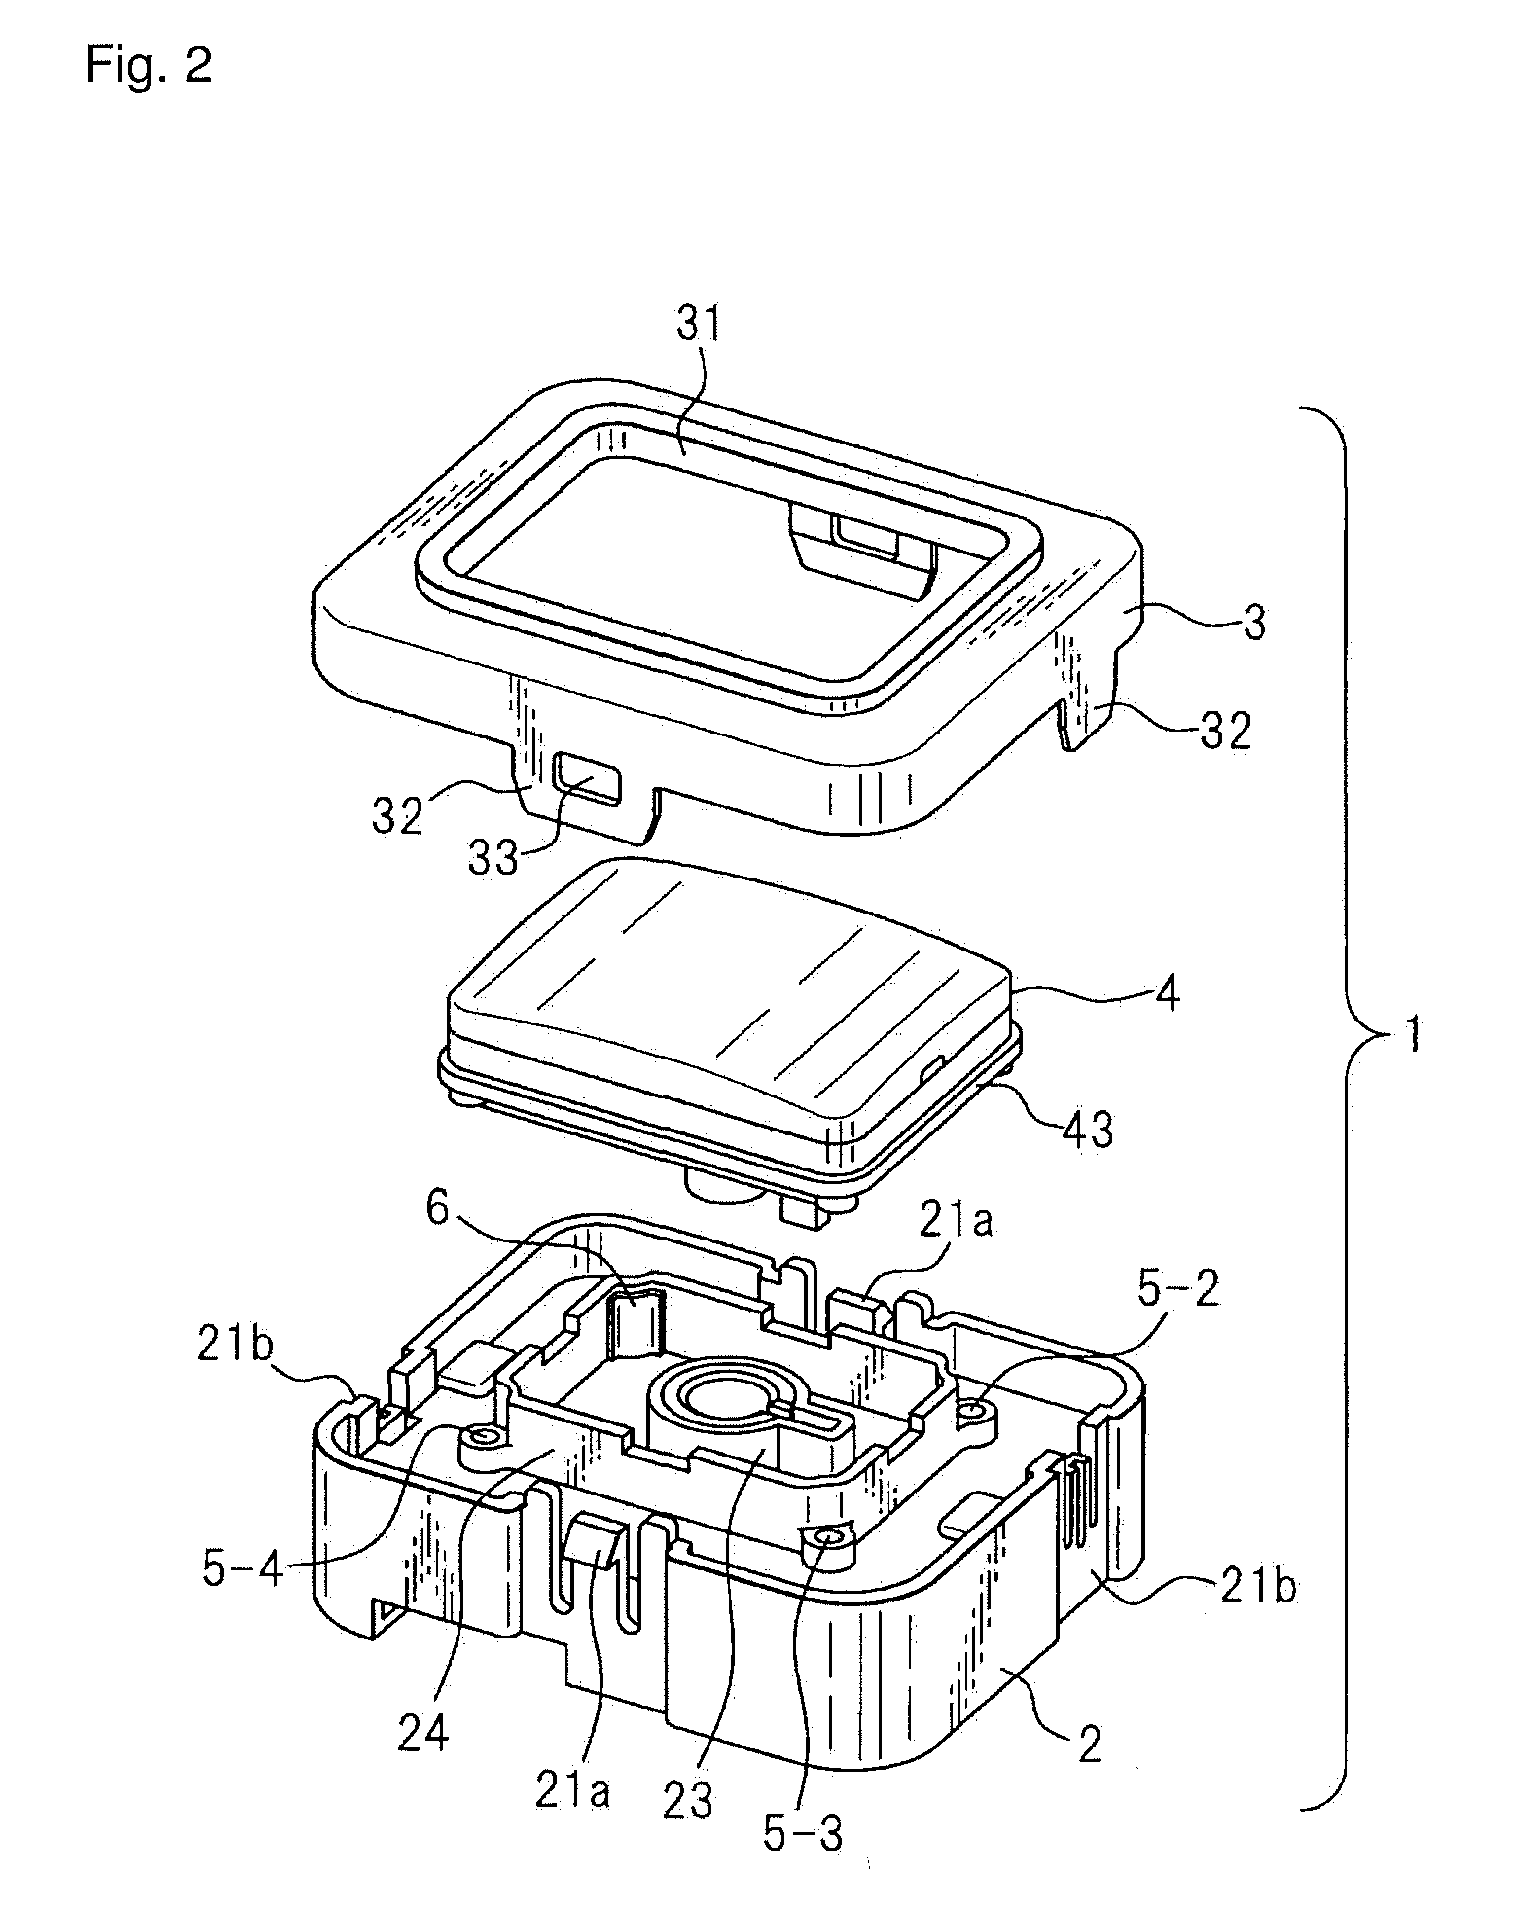 Pushbutton device and game machine